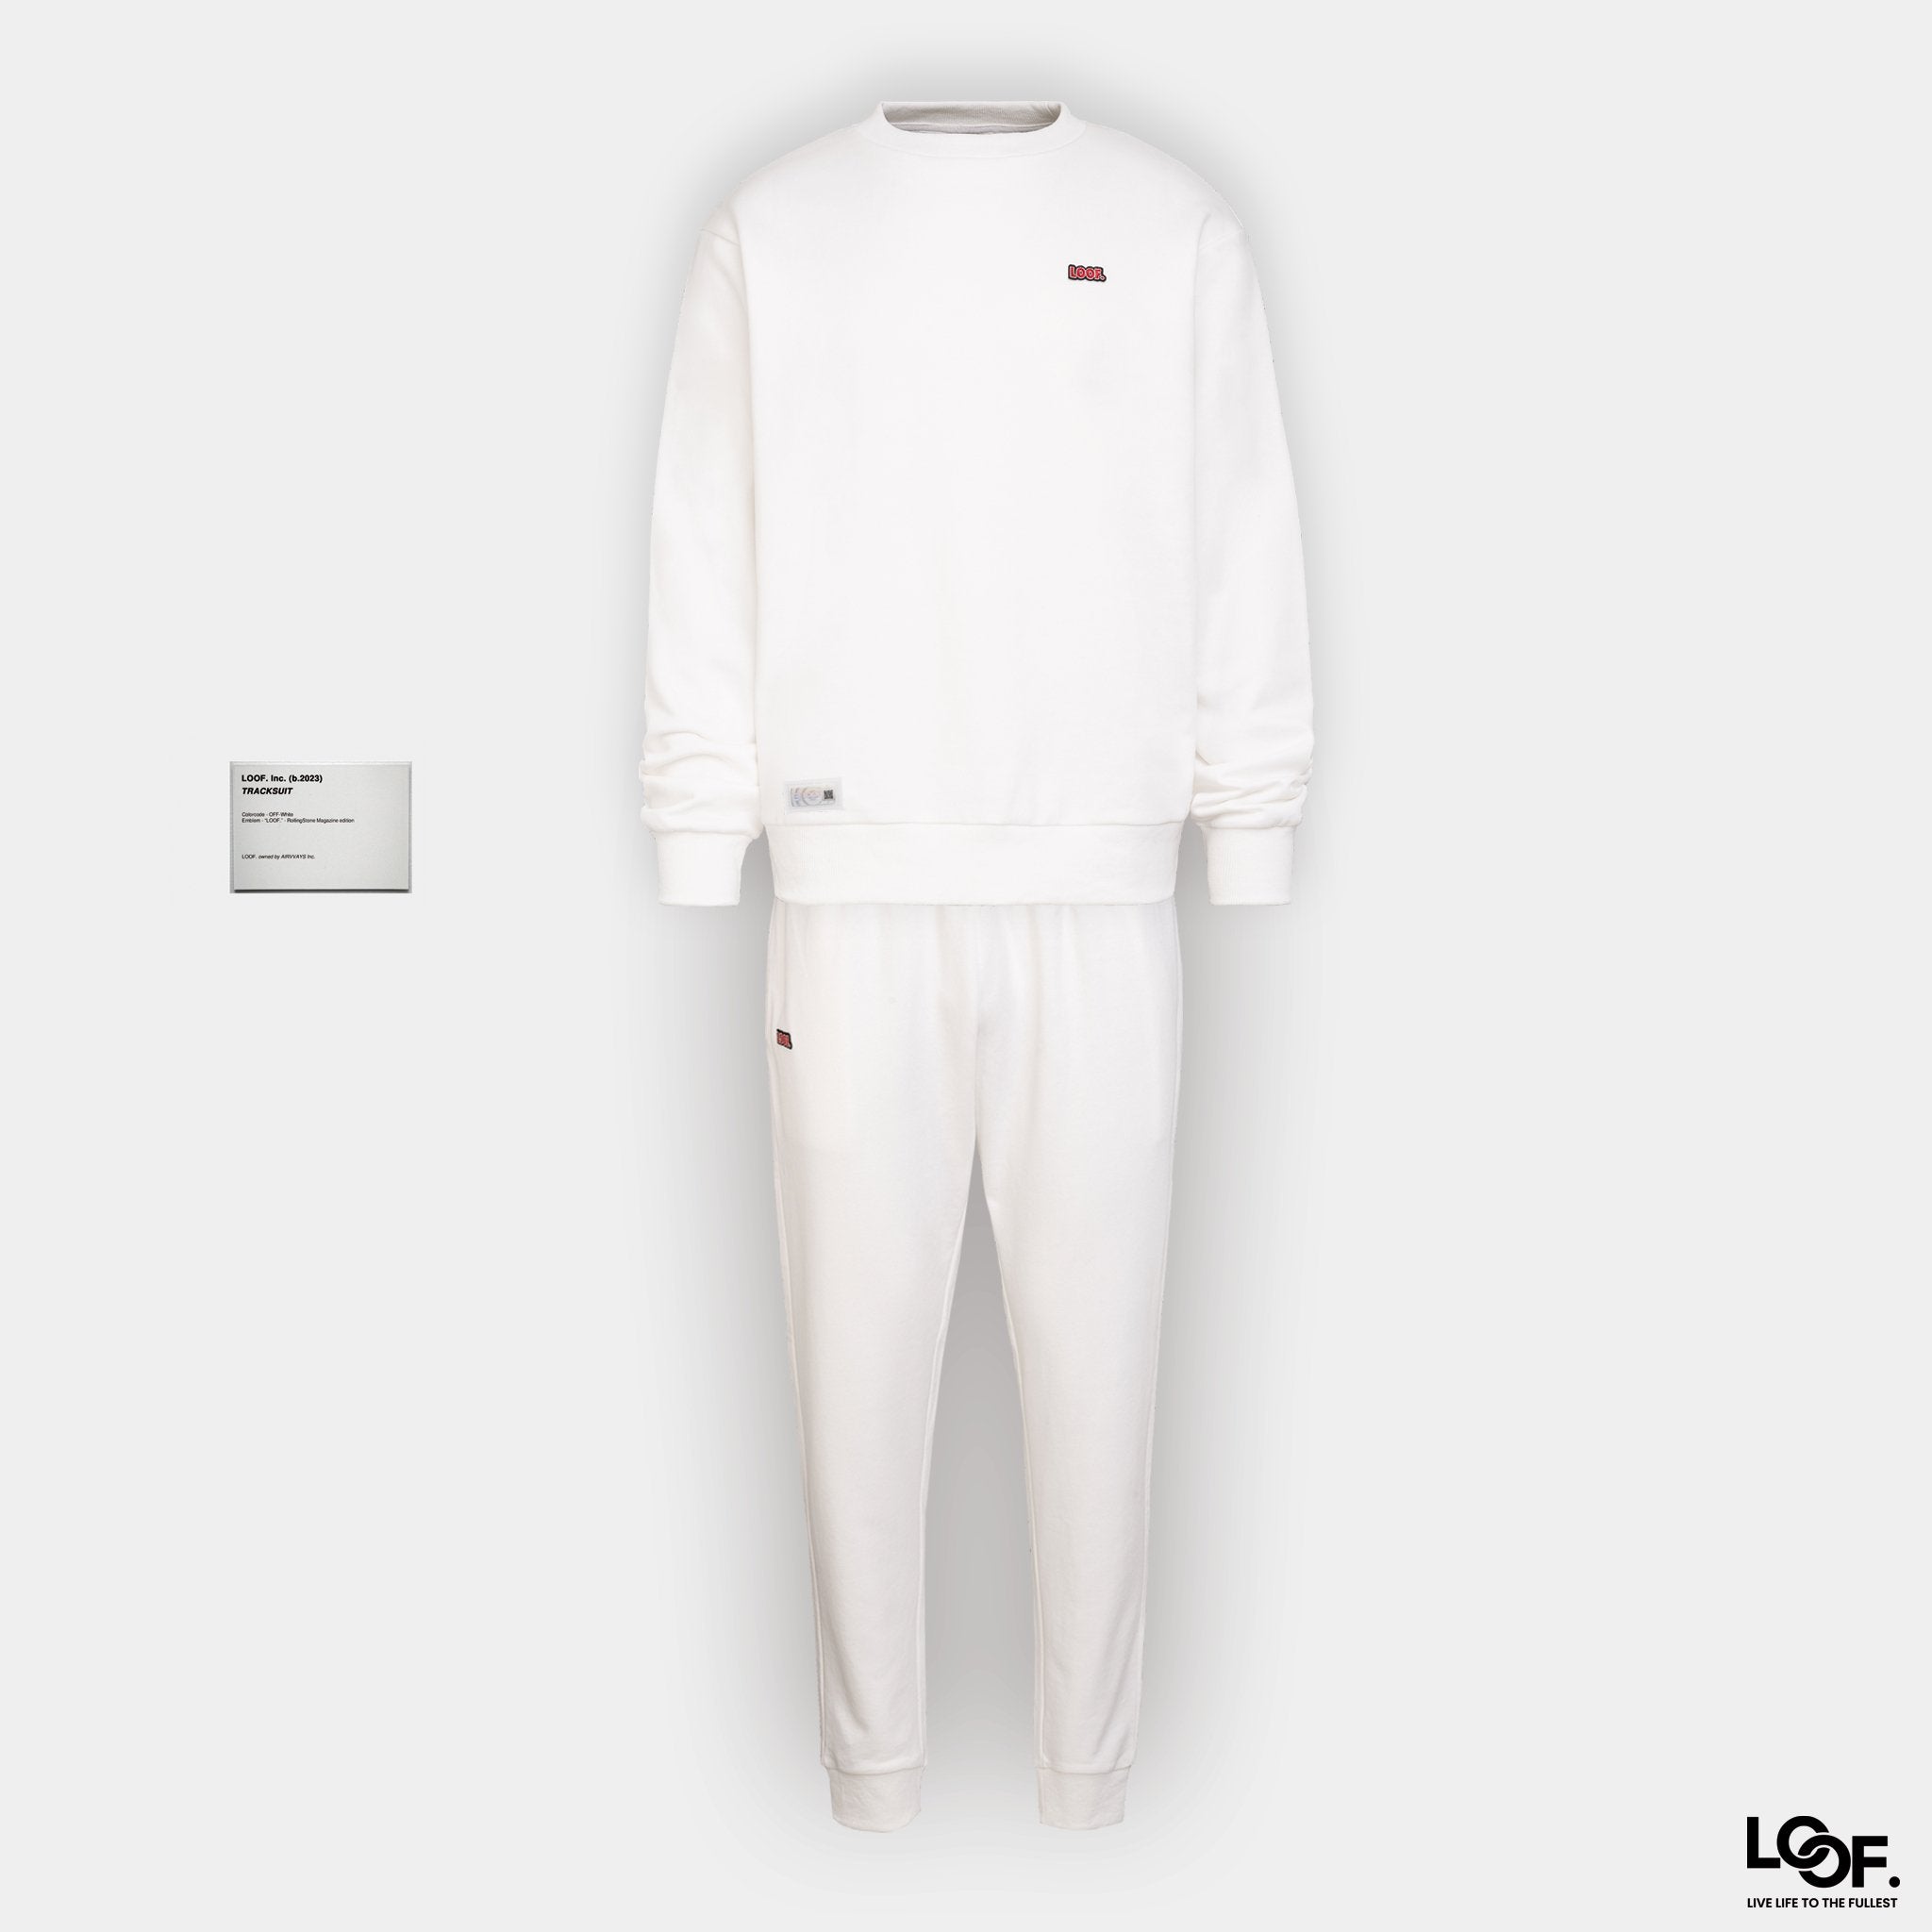 L2OF.-Tracksuit - Tracksuit - LOOF